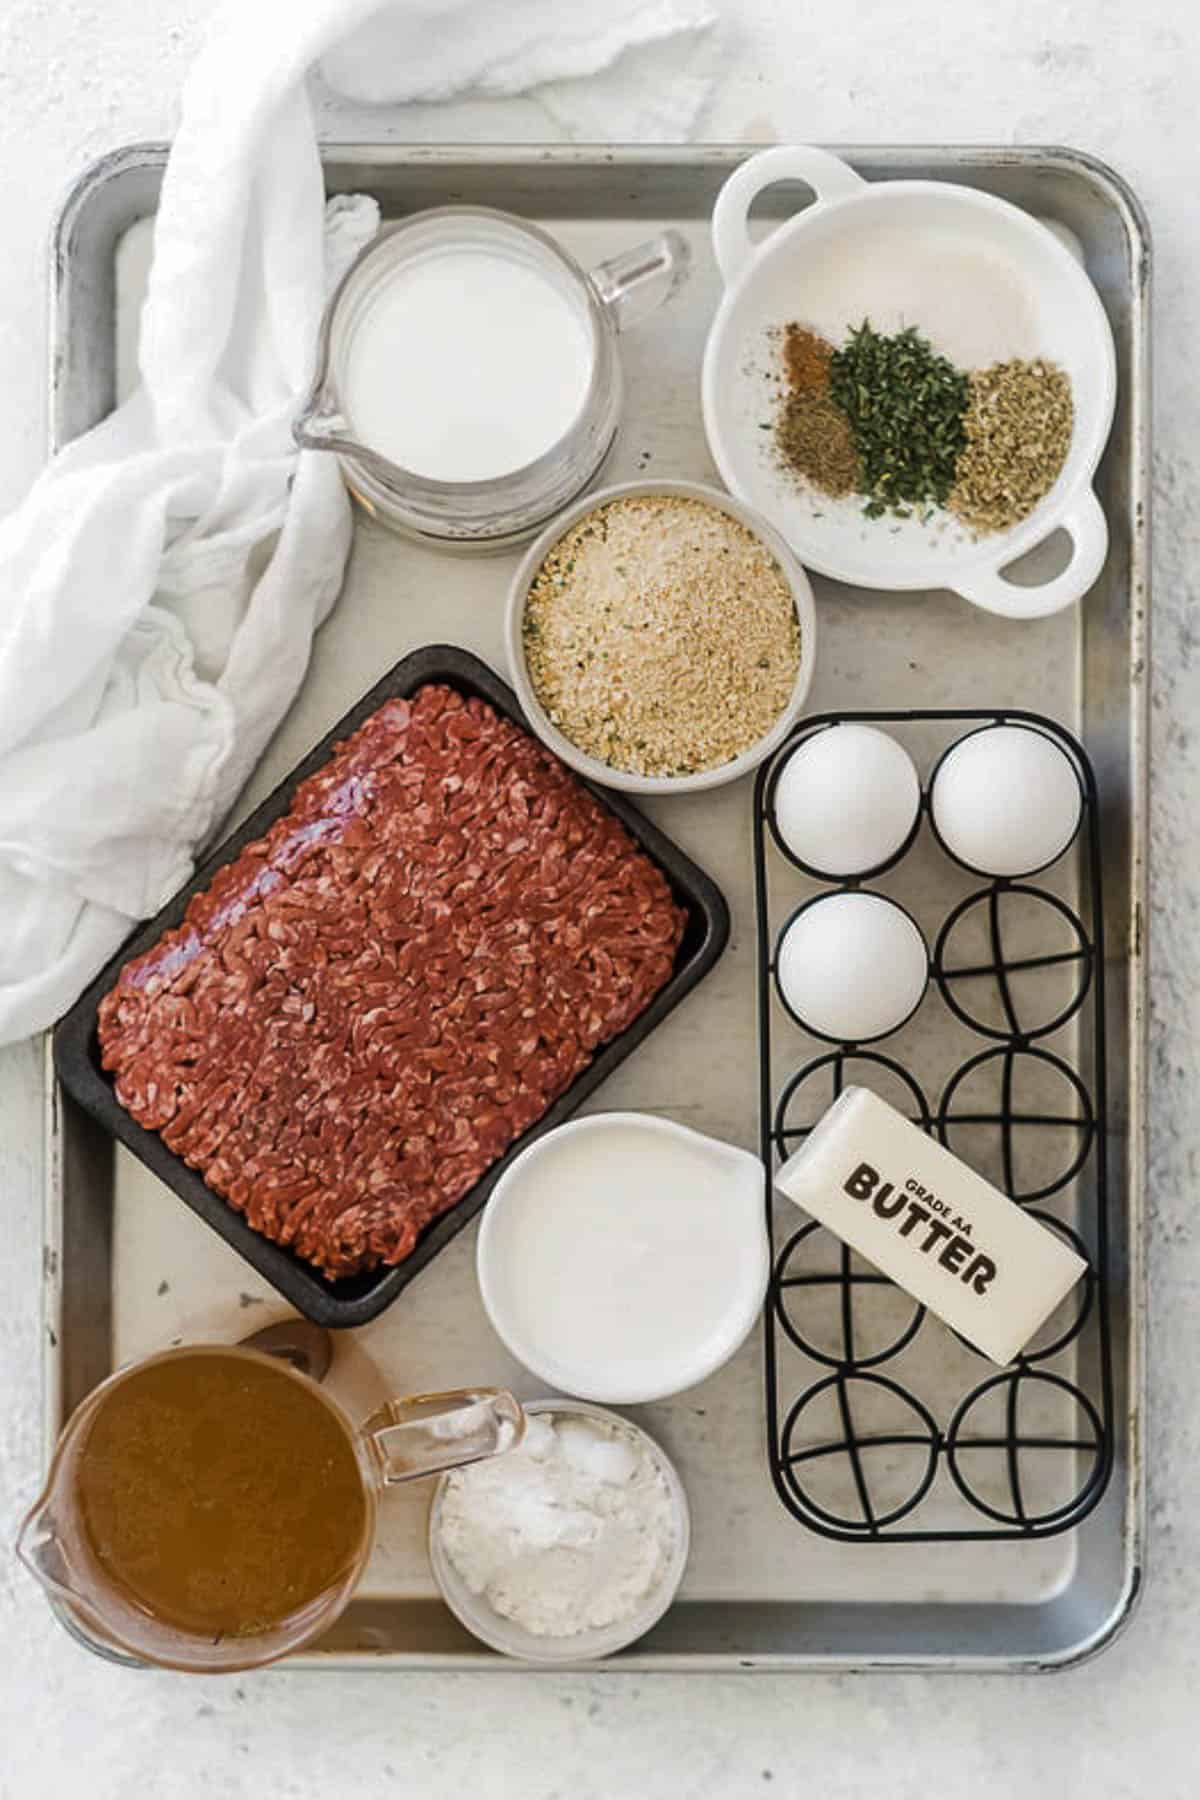 Ingredients for swedish meatballs on a tray before preparing.